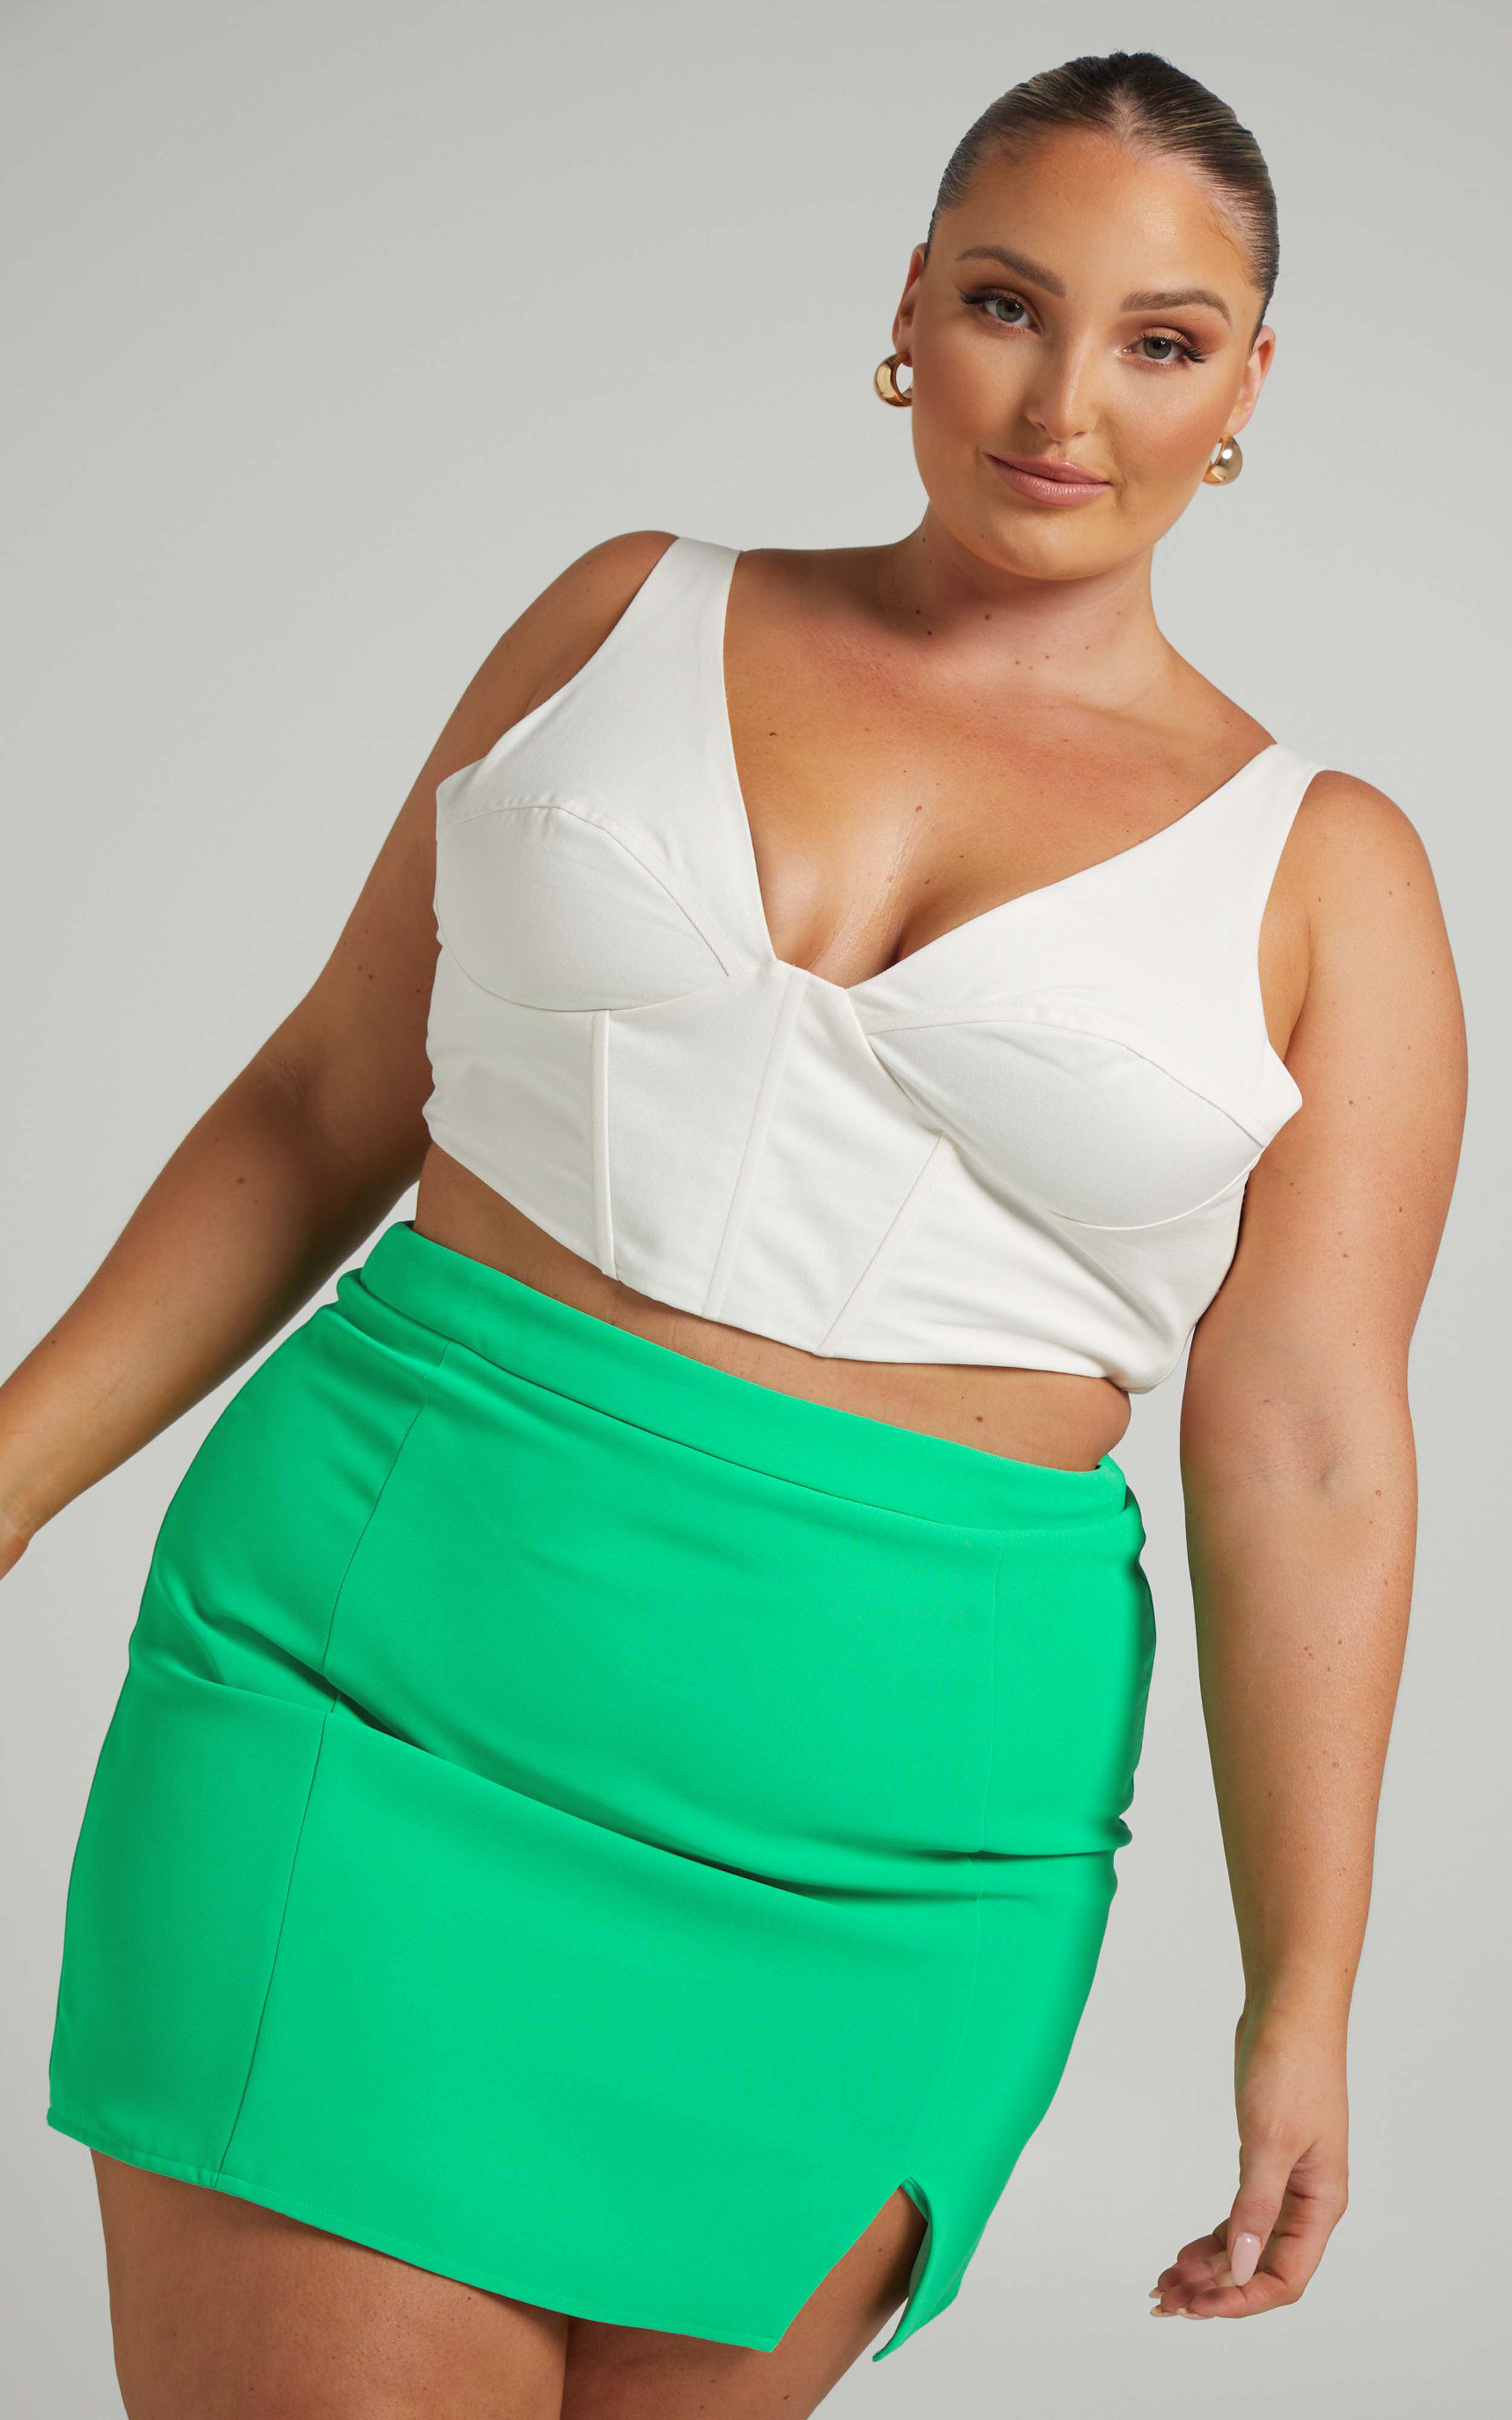 Evelenna Skirt in Green - 04, GRN2, hi-res image number null